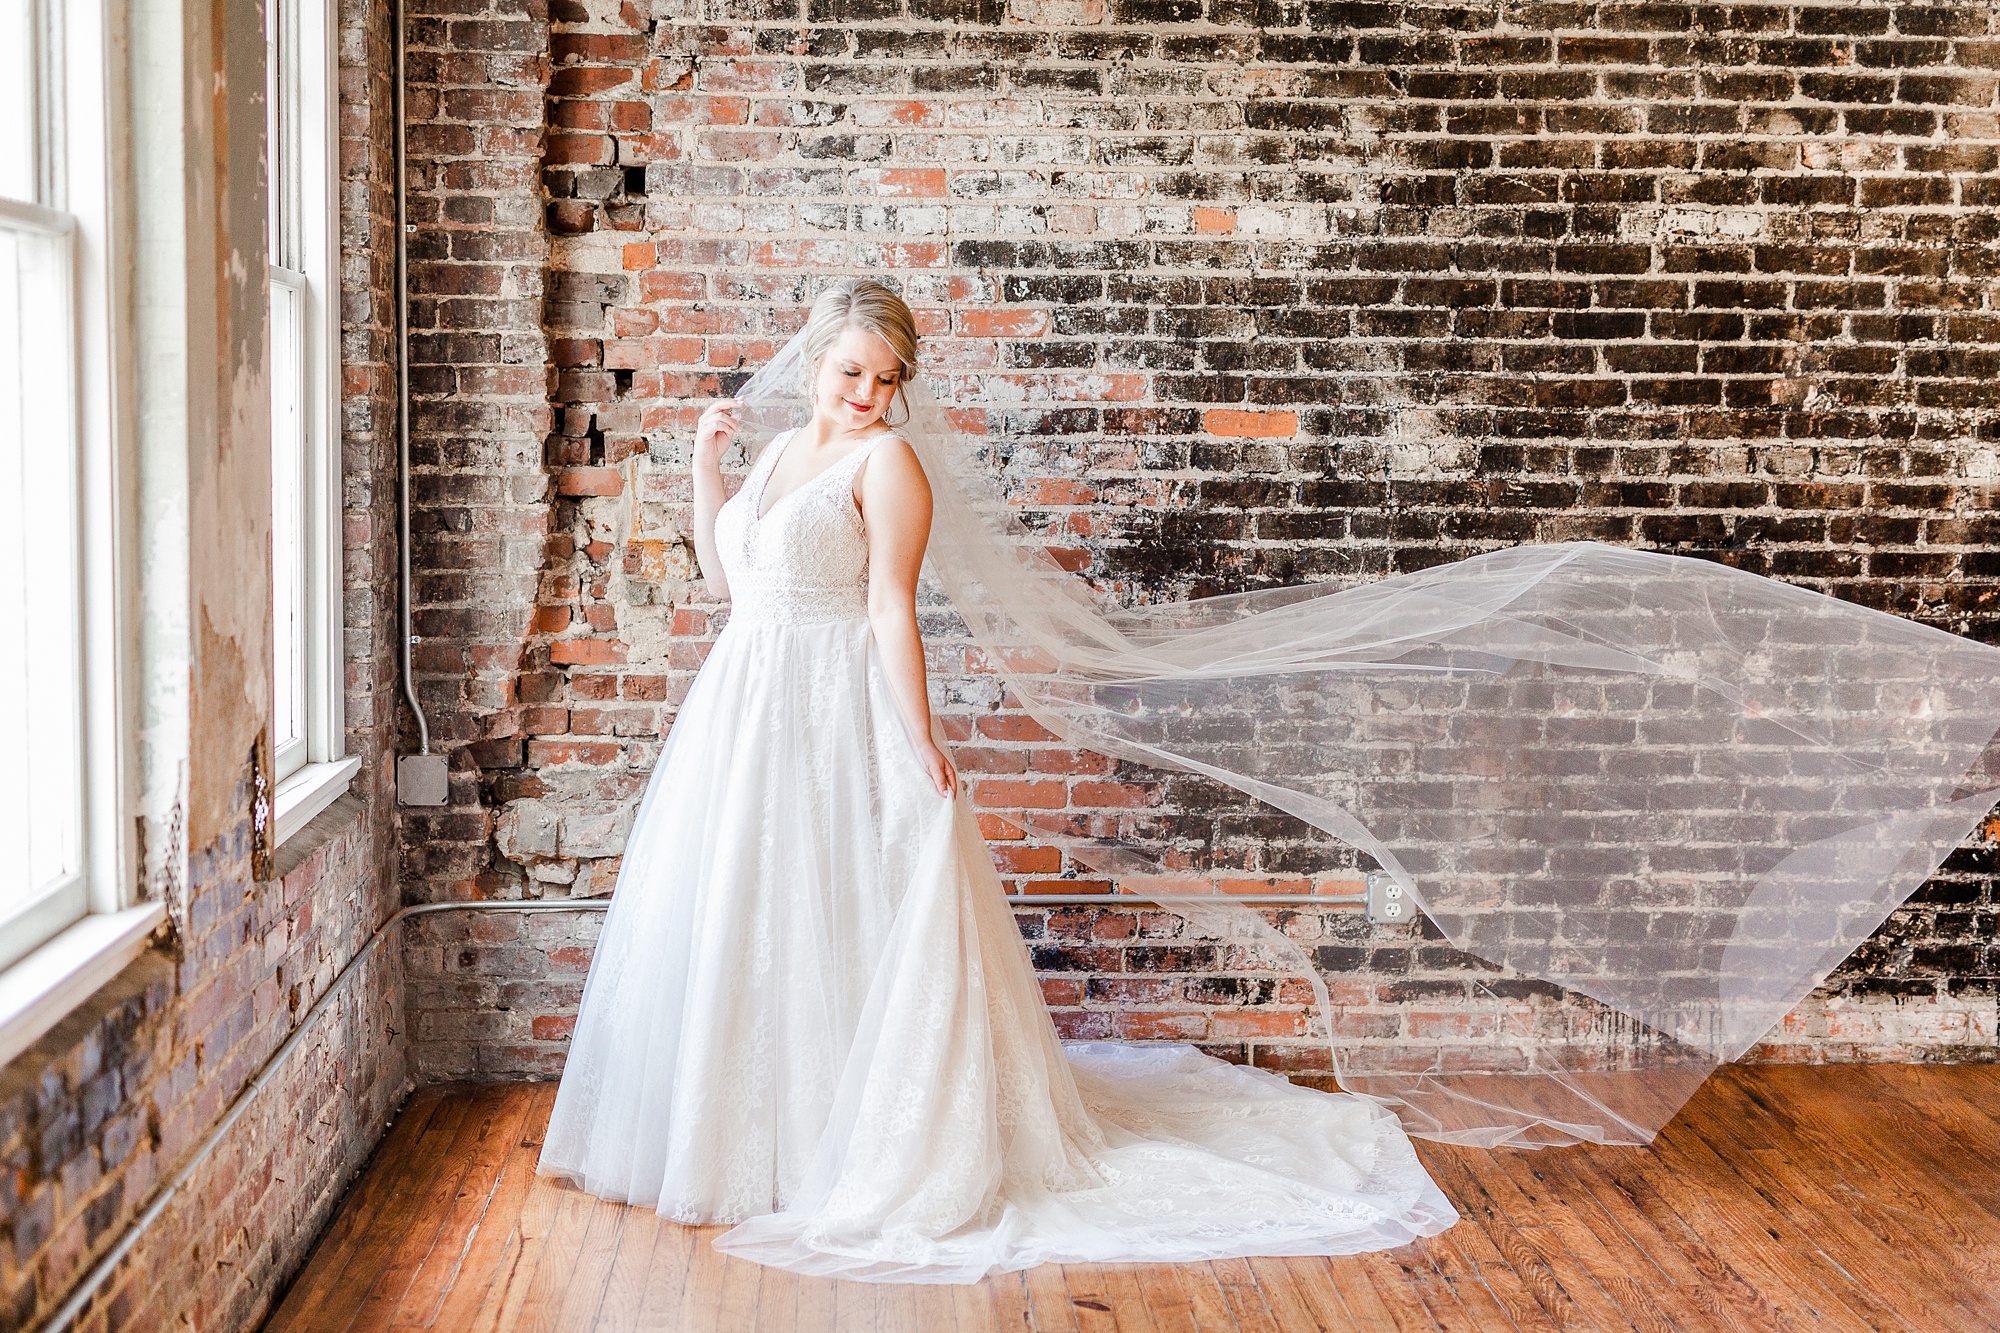 bride's veil floats during portraits at The Stockroom at 230